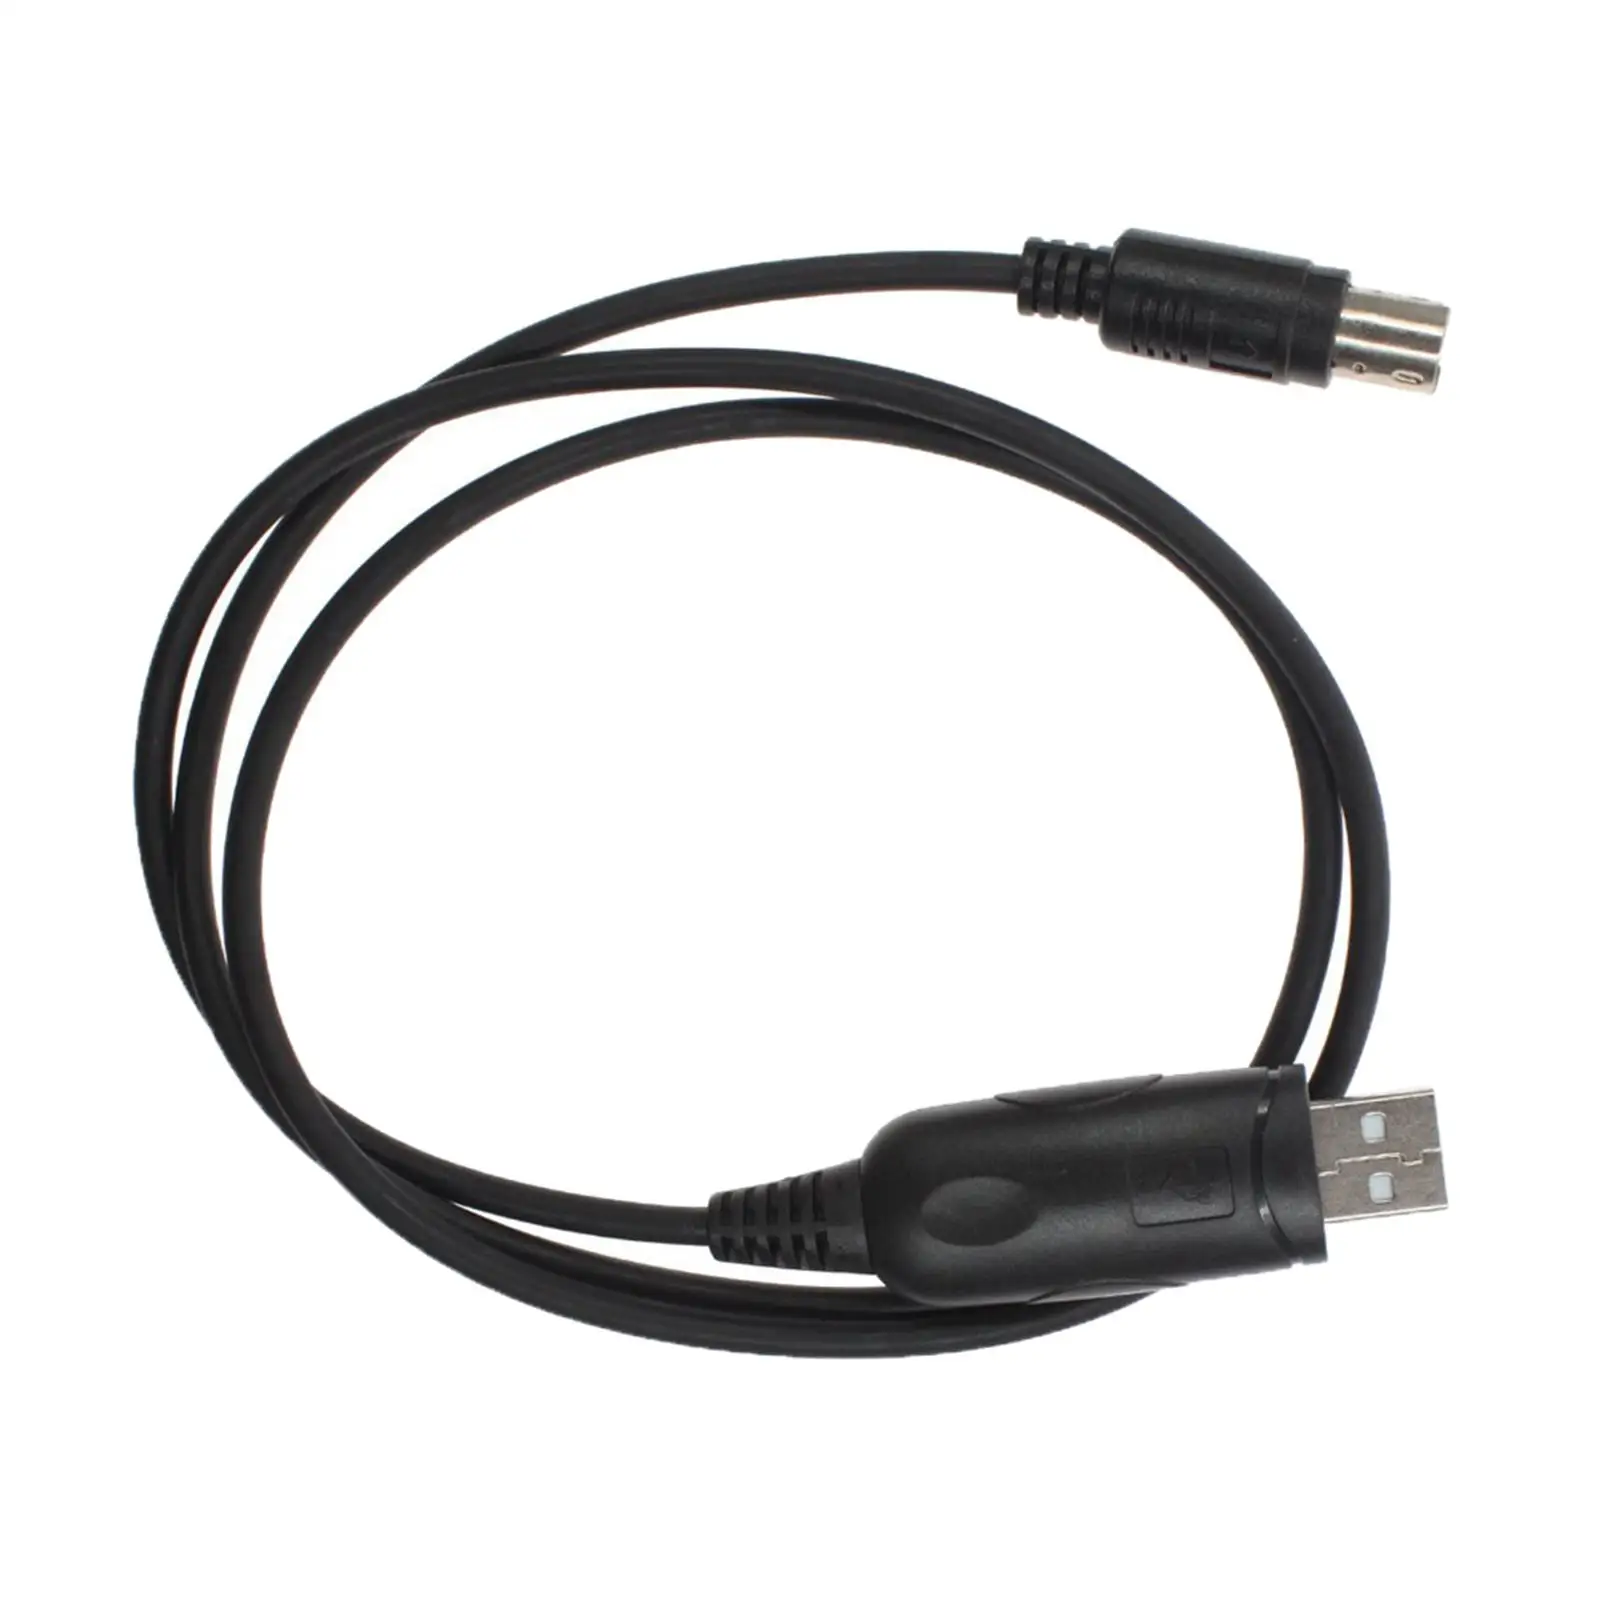 USB Programming Cable, 1M/3.28  ft-8800R, FT-8500M, FT-8500R